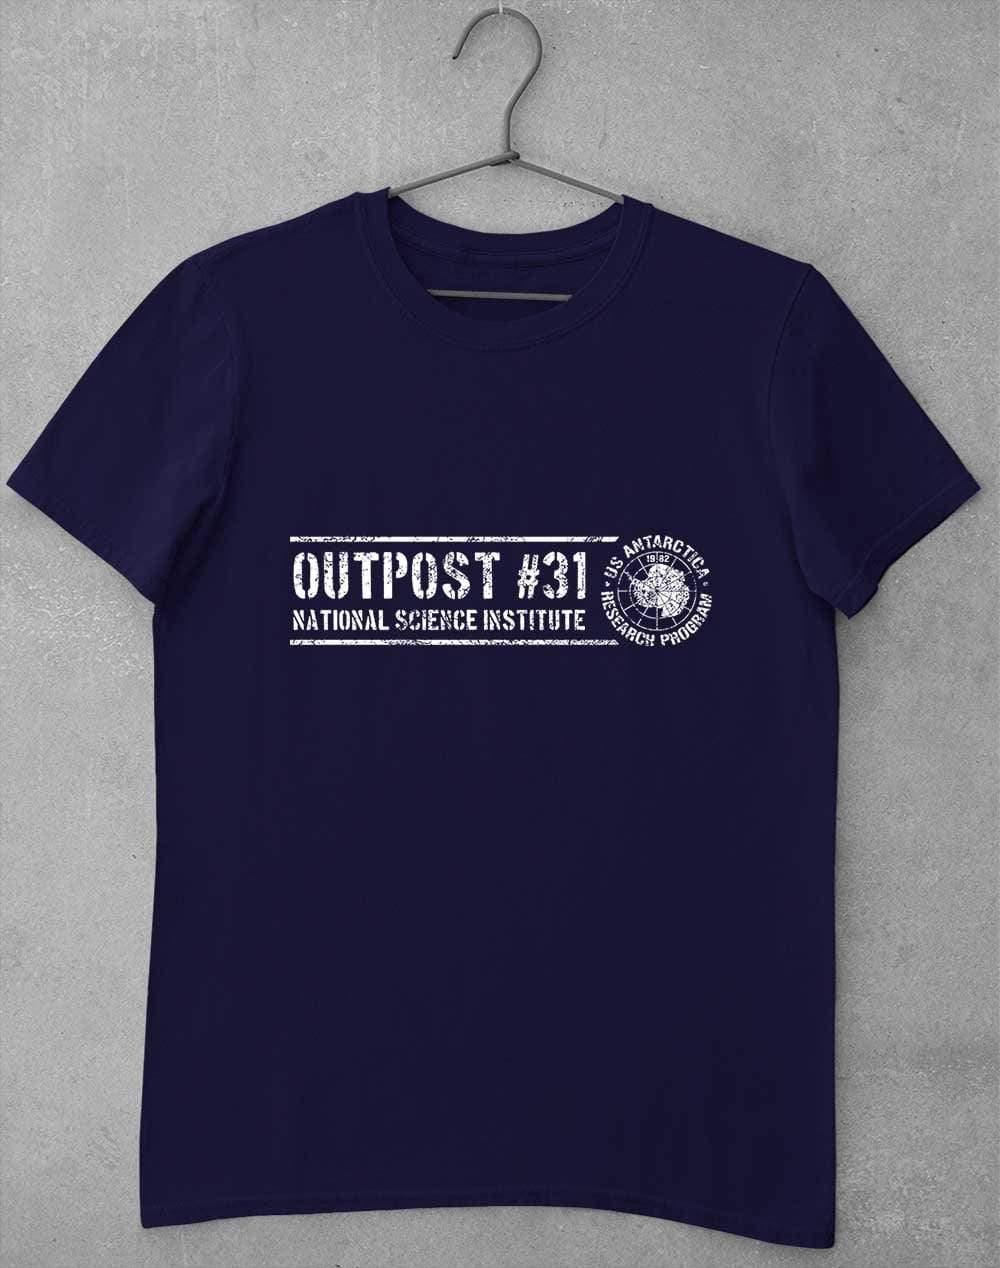 Outpost 31 Antarctica T-Shirt S / Navy  - Off World Tees